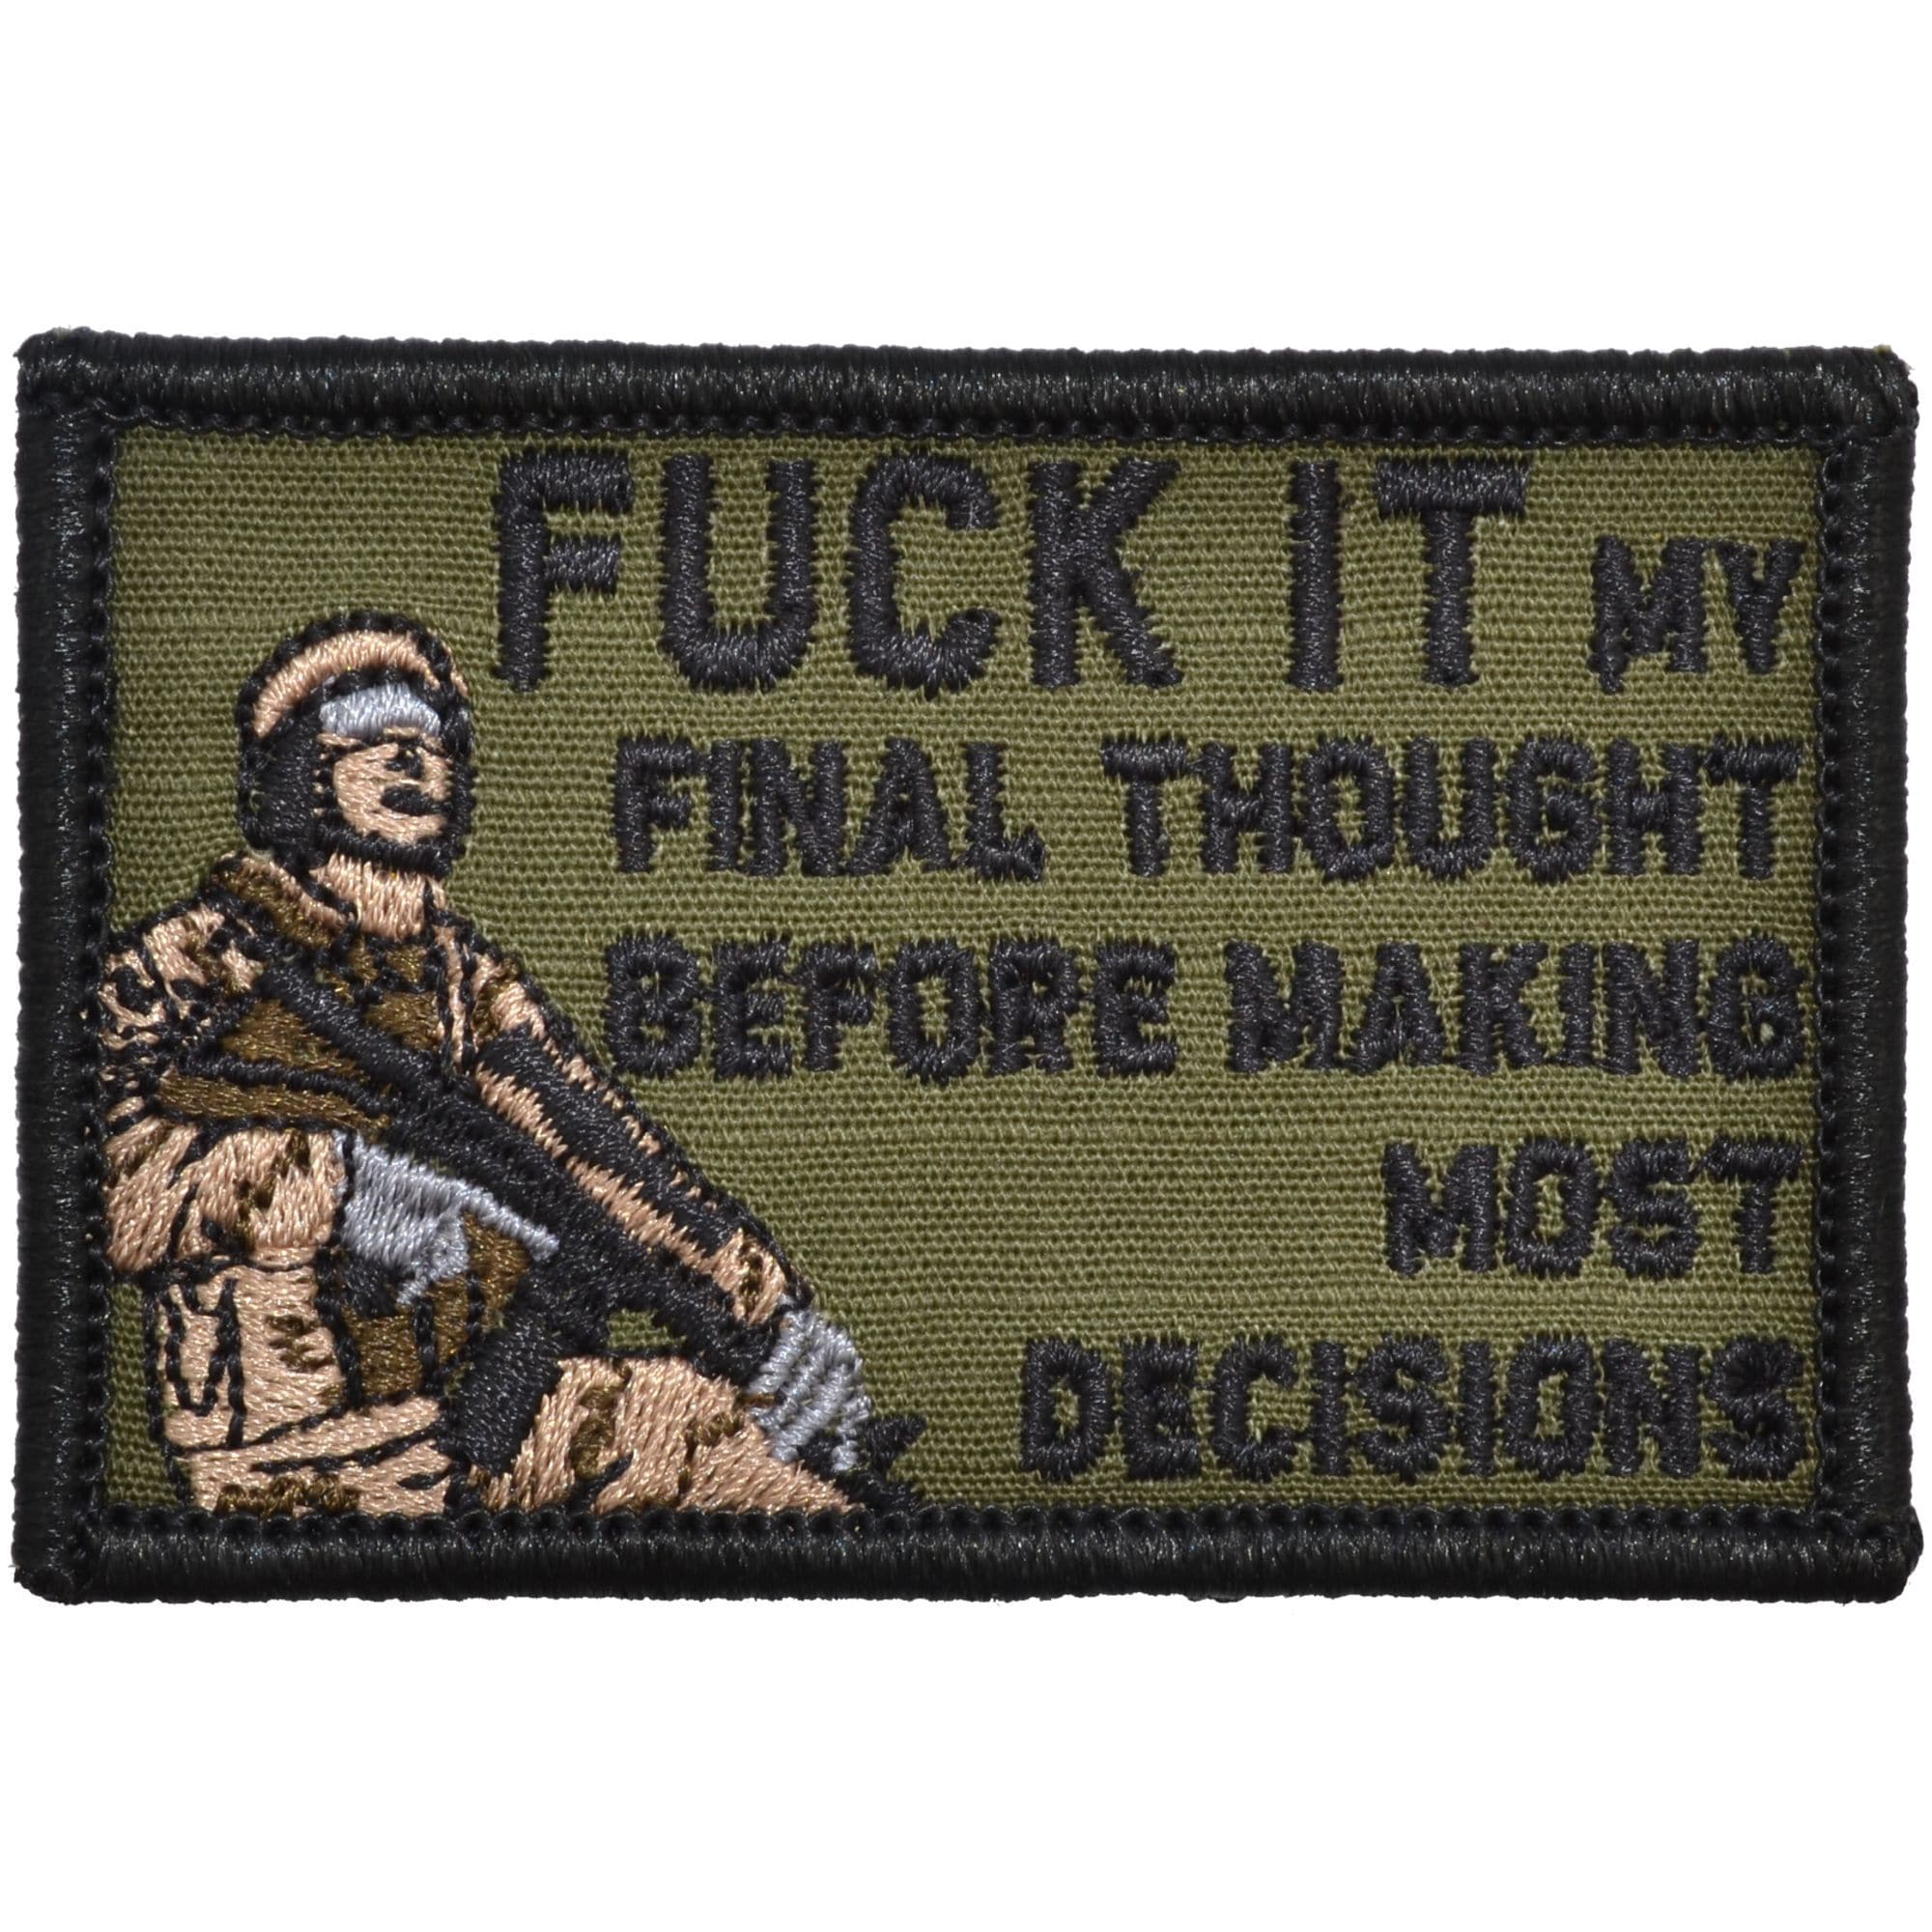 Tactical Gear Junkie Patches Olive Drab Fuck It My Final Thought Before Making Most Decisions - 2x3 Patch